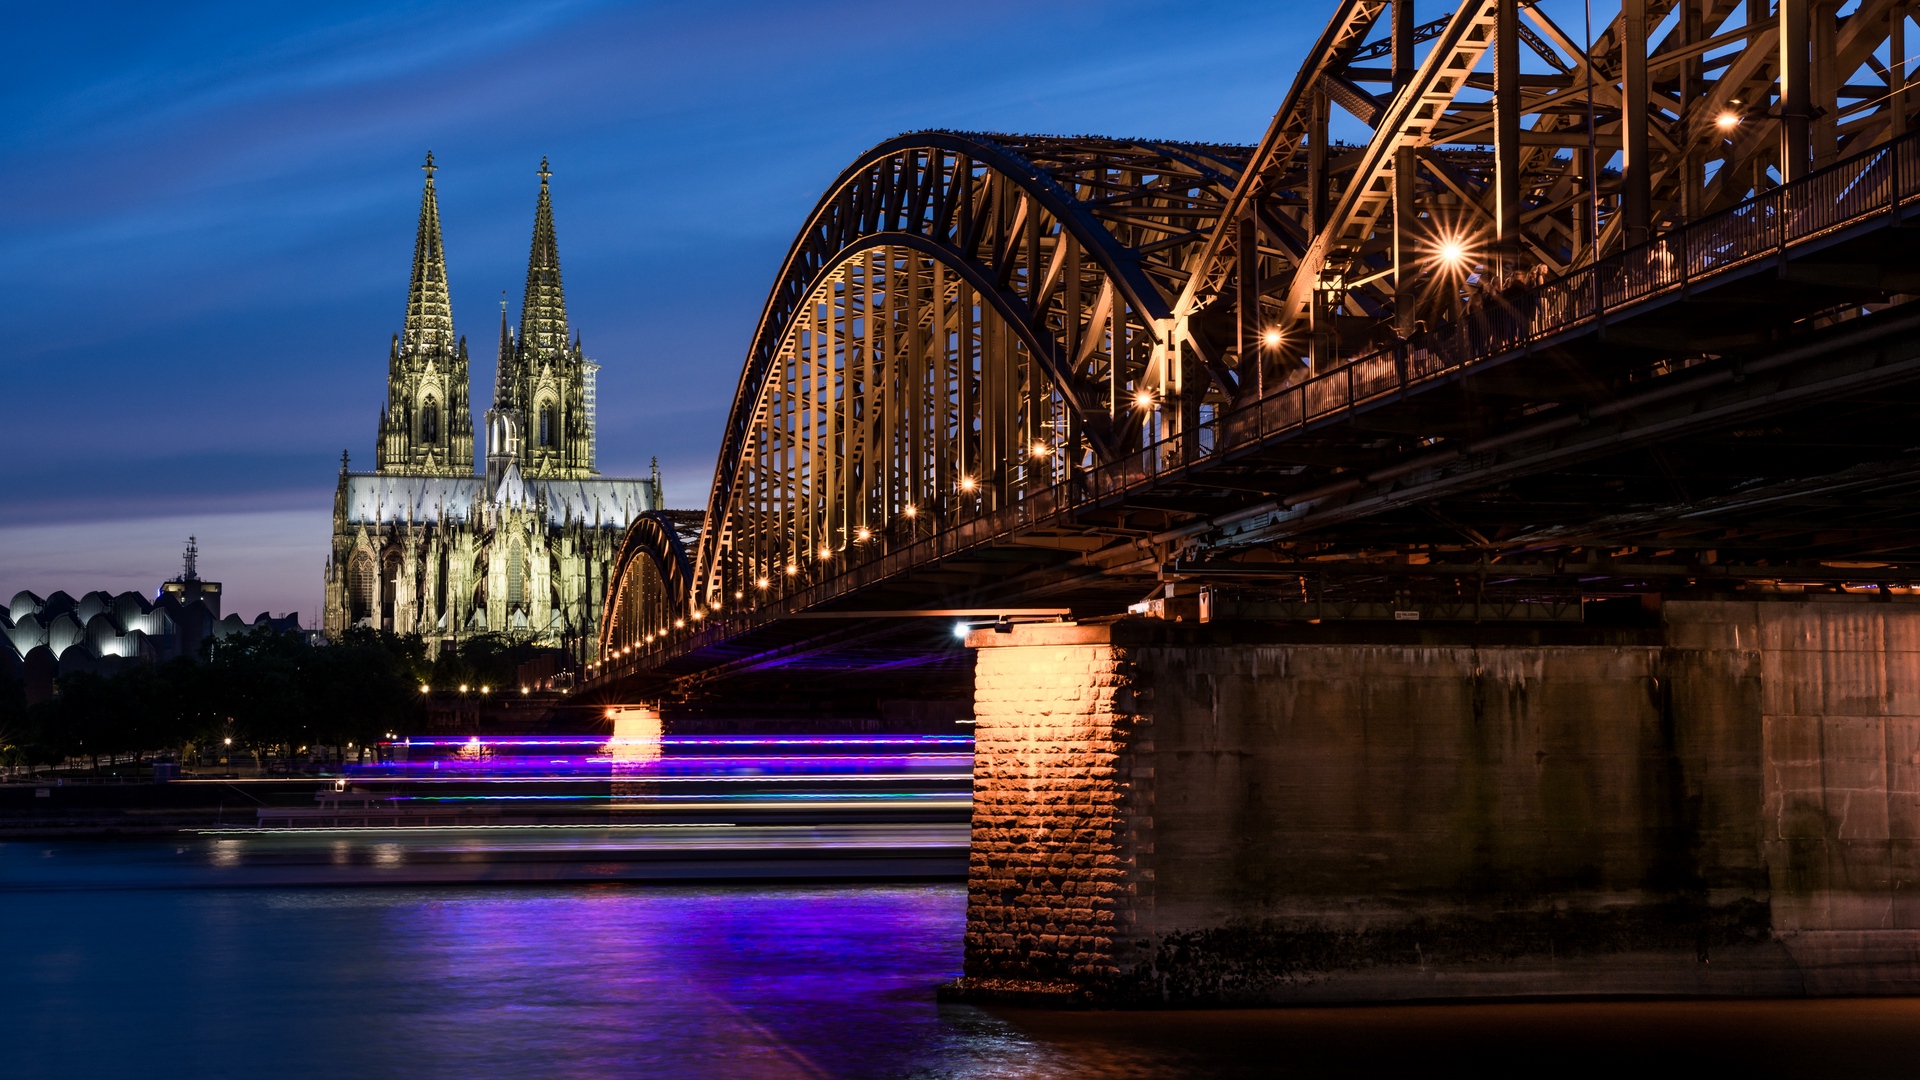 General 1920x1080 night city lights bridge Cologne Germany cathedral cityscape landmark Europe